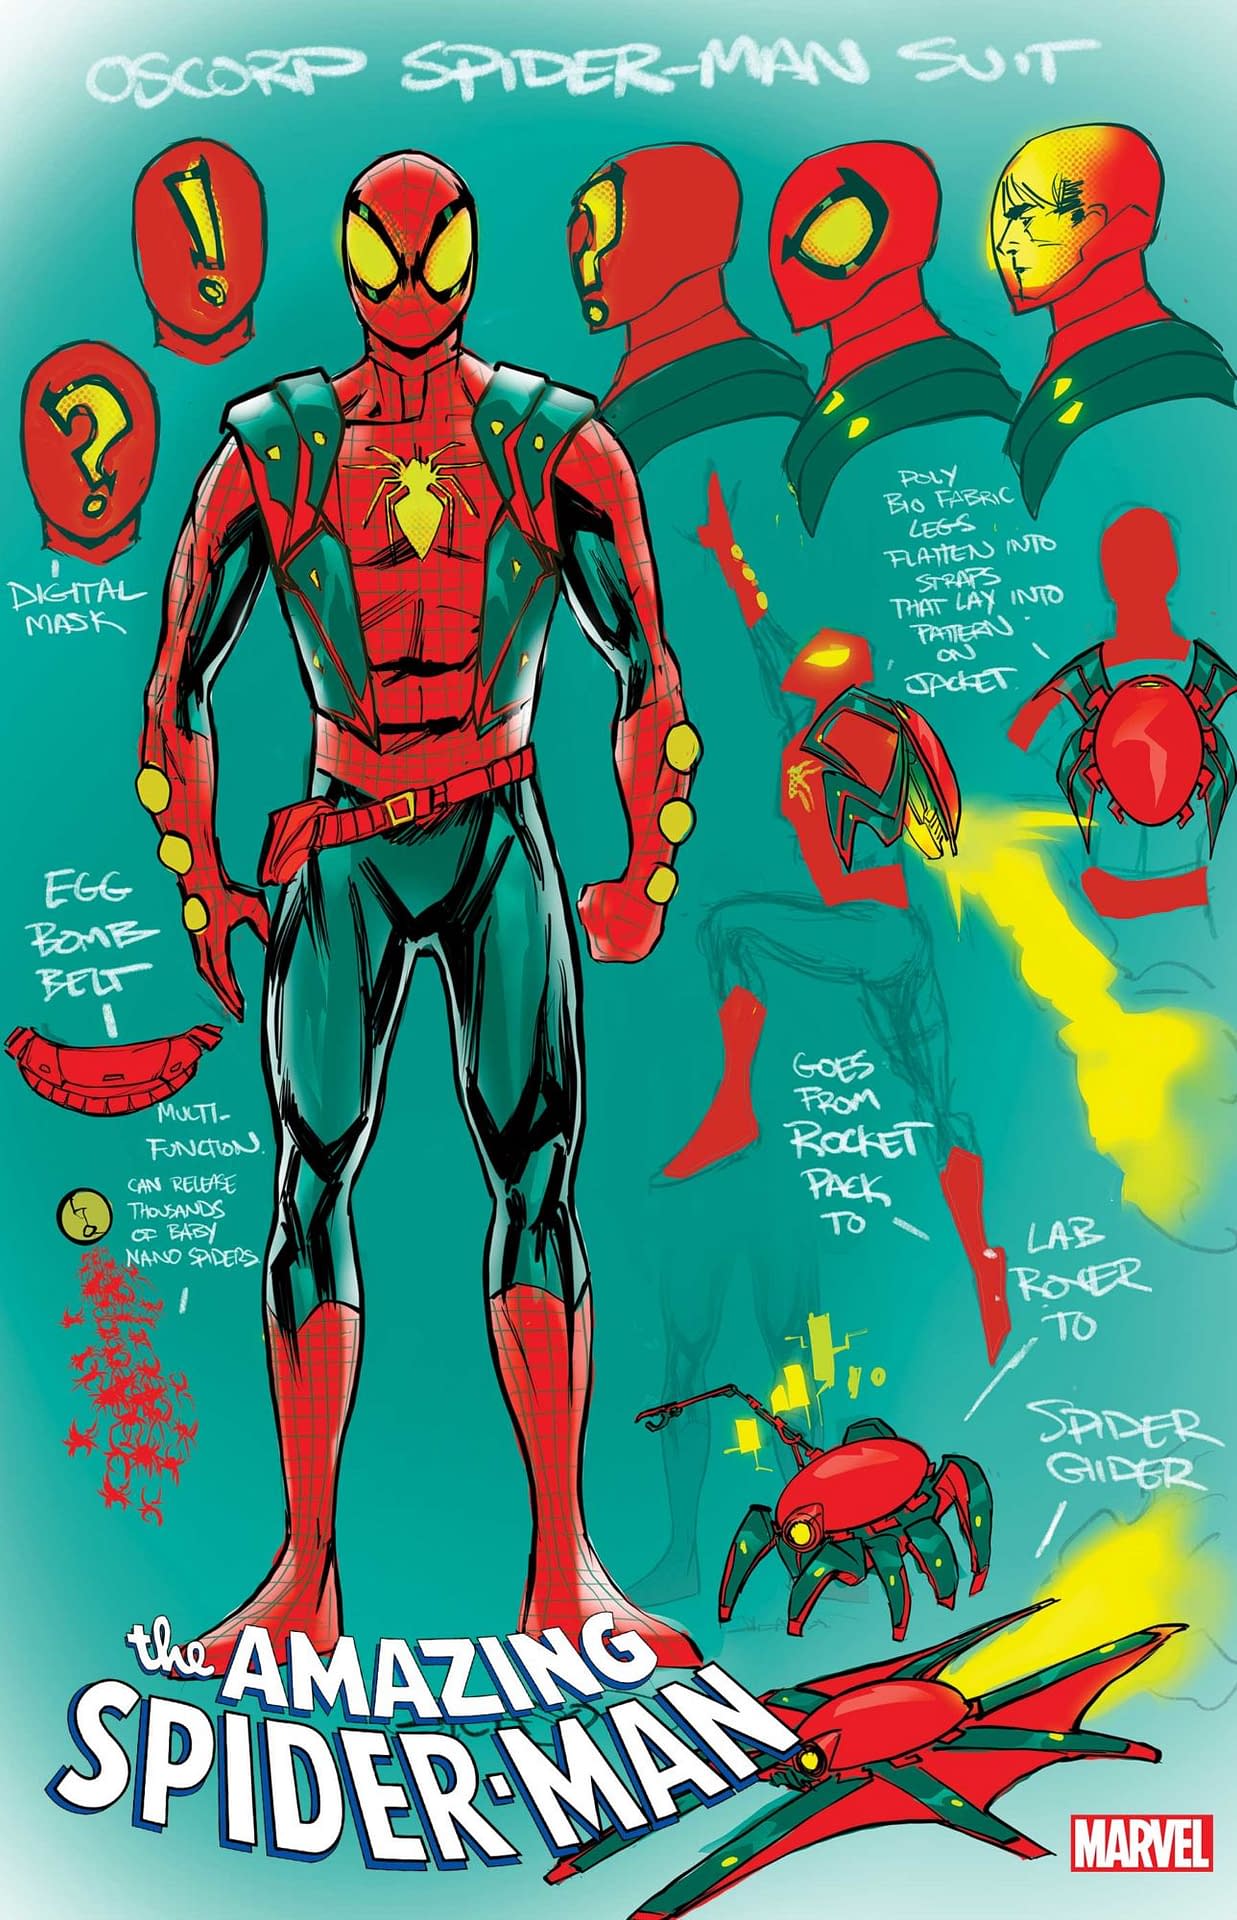 So Who Is Wearing The New Spider-Suit? Peter Parker Or Norman Osborn?